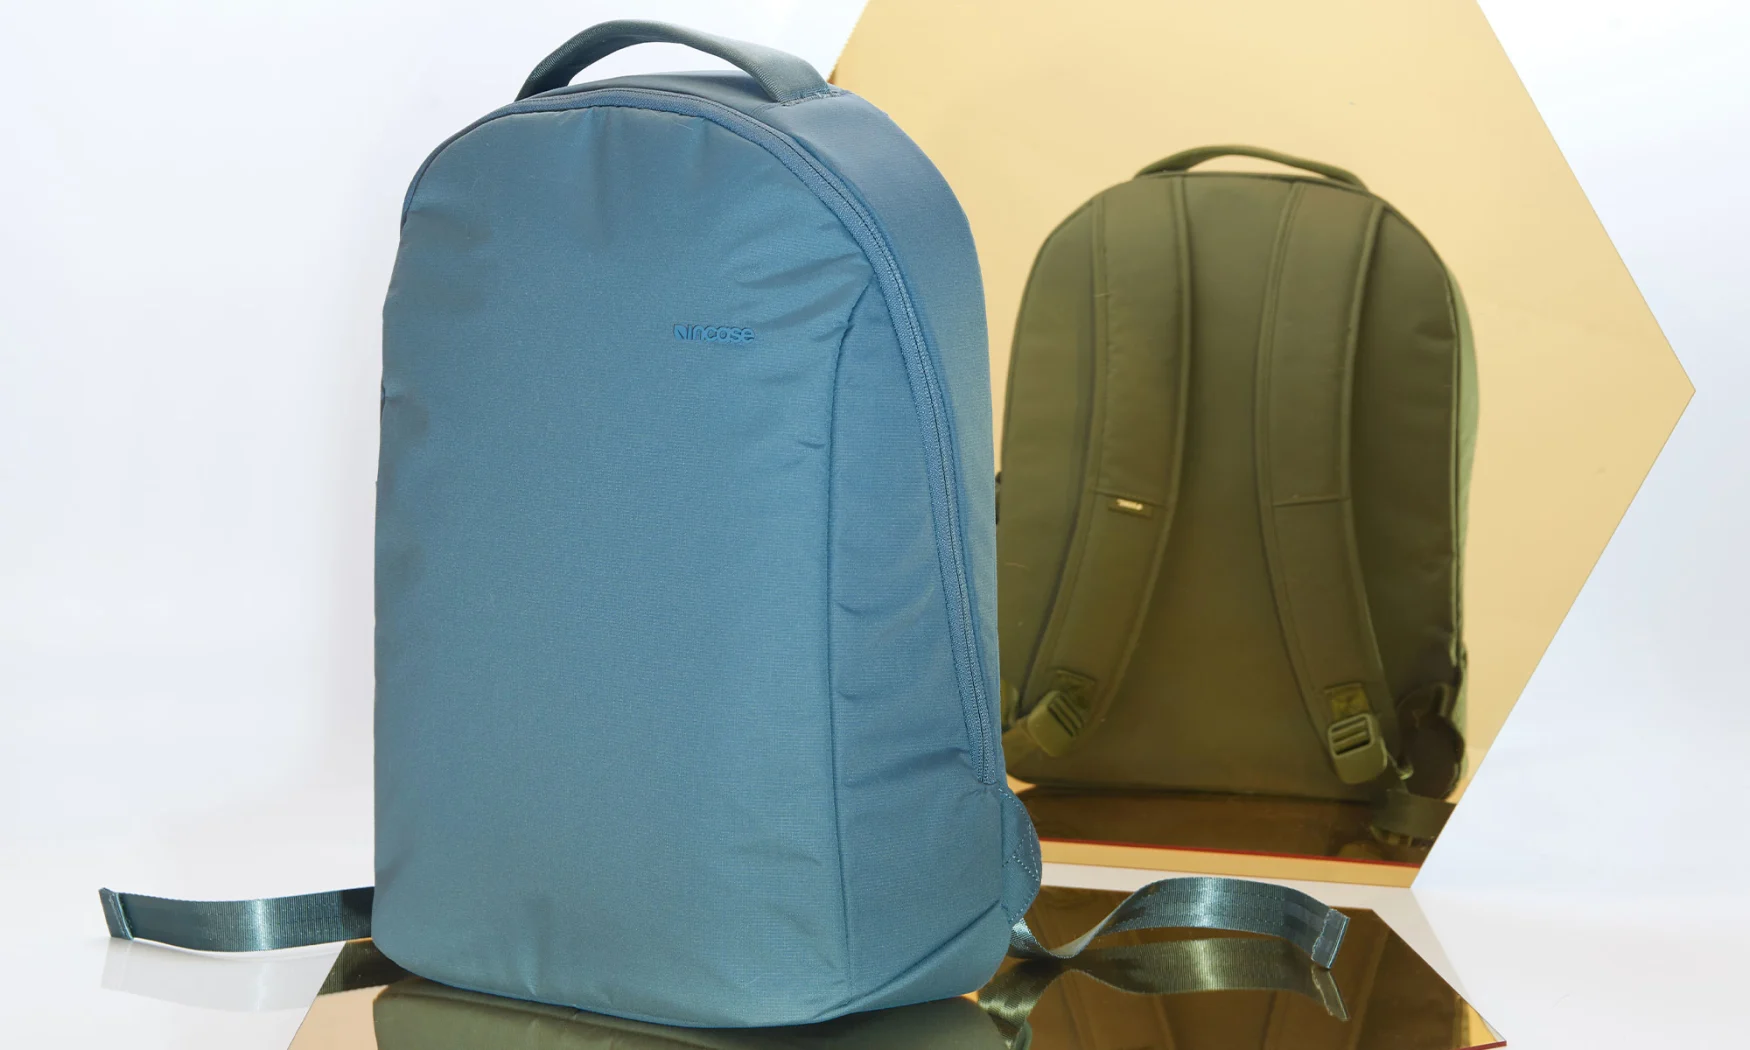 Holiday Gift Guide: Incase Bionic backpack